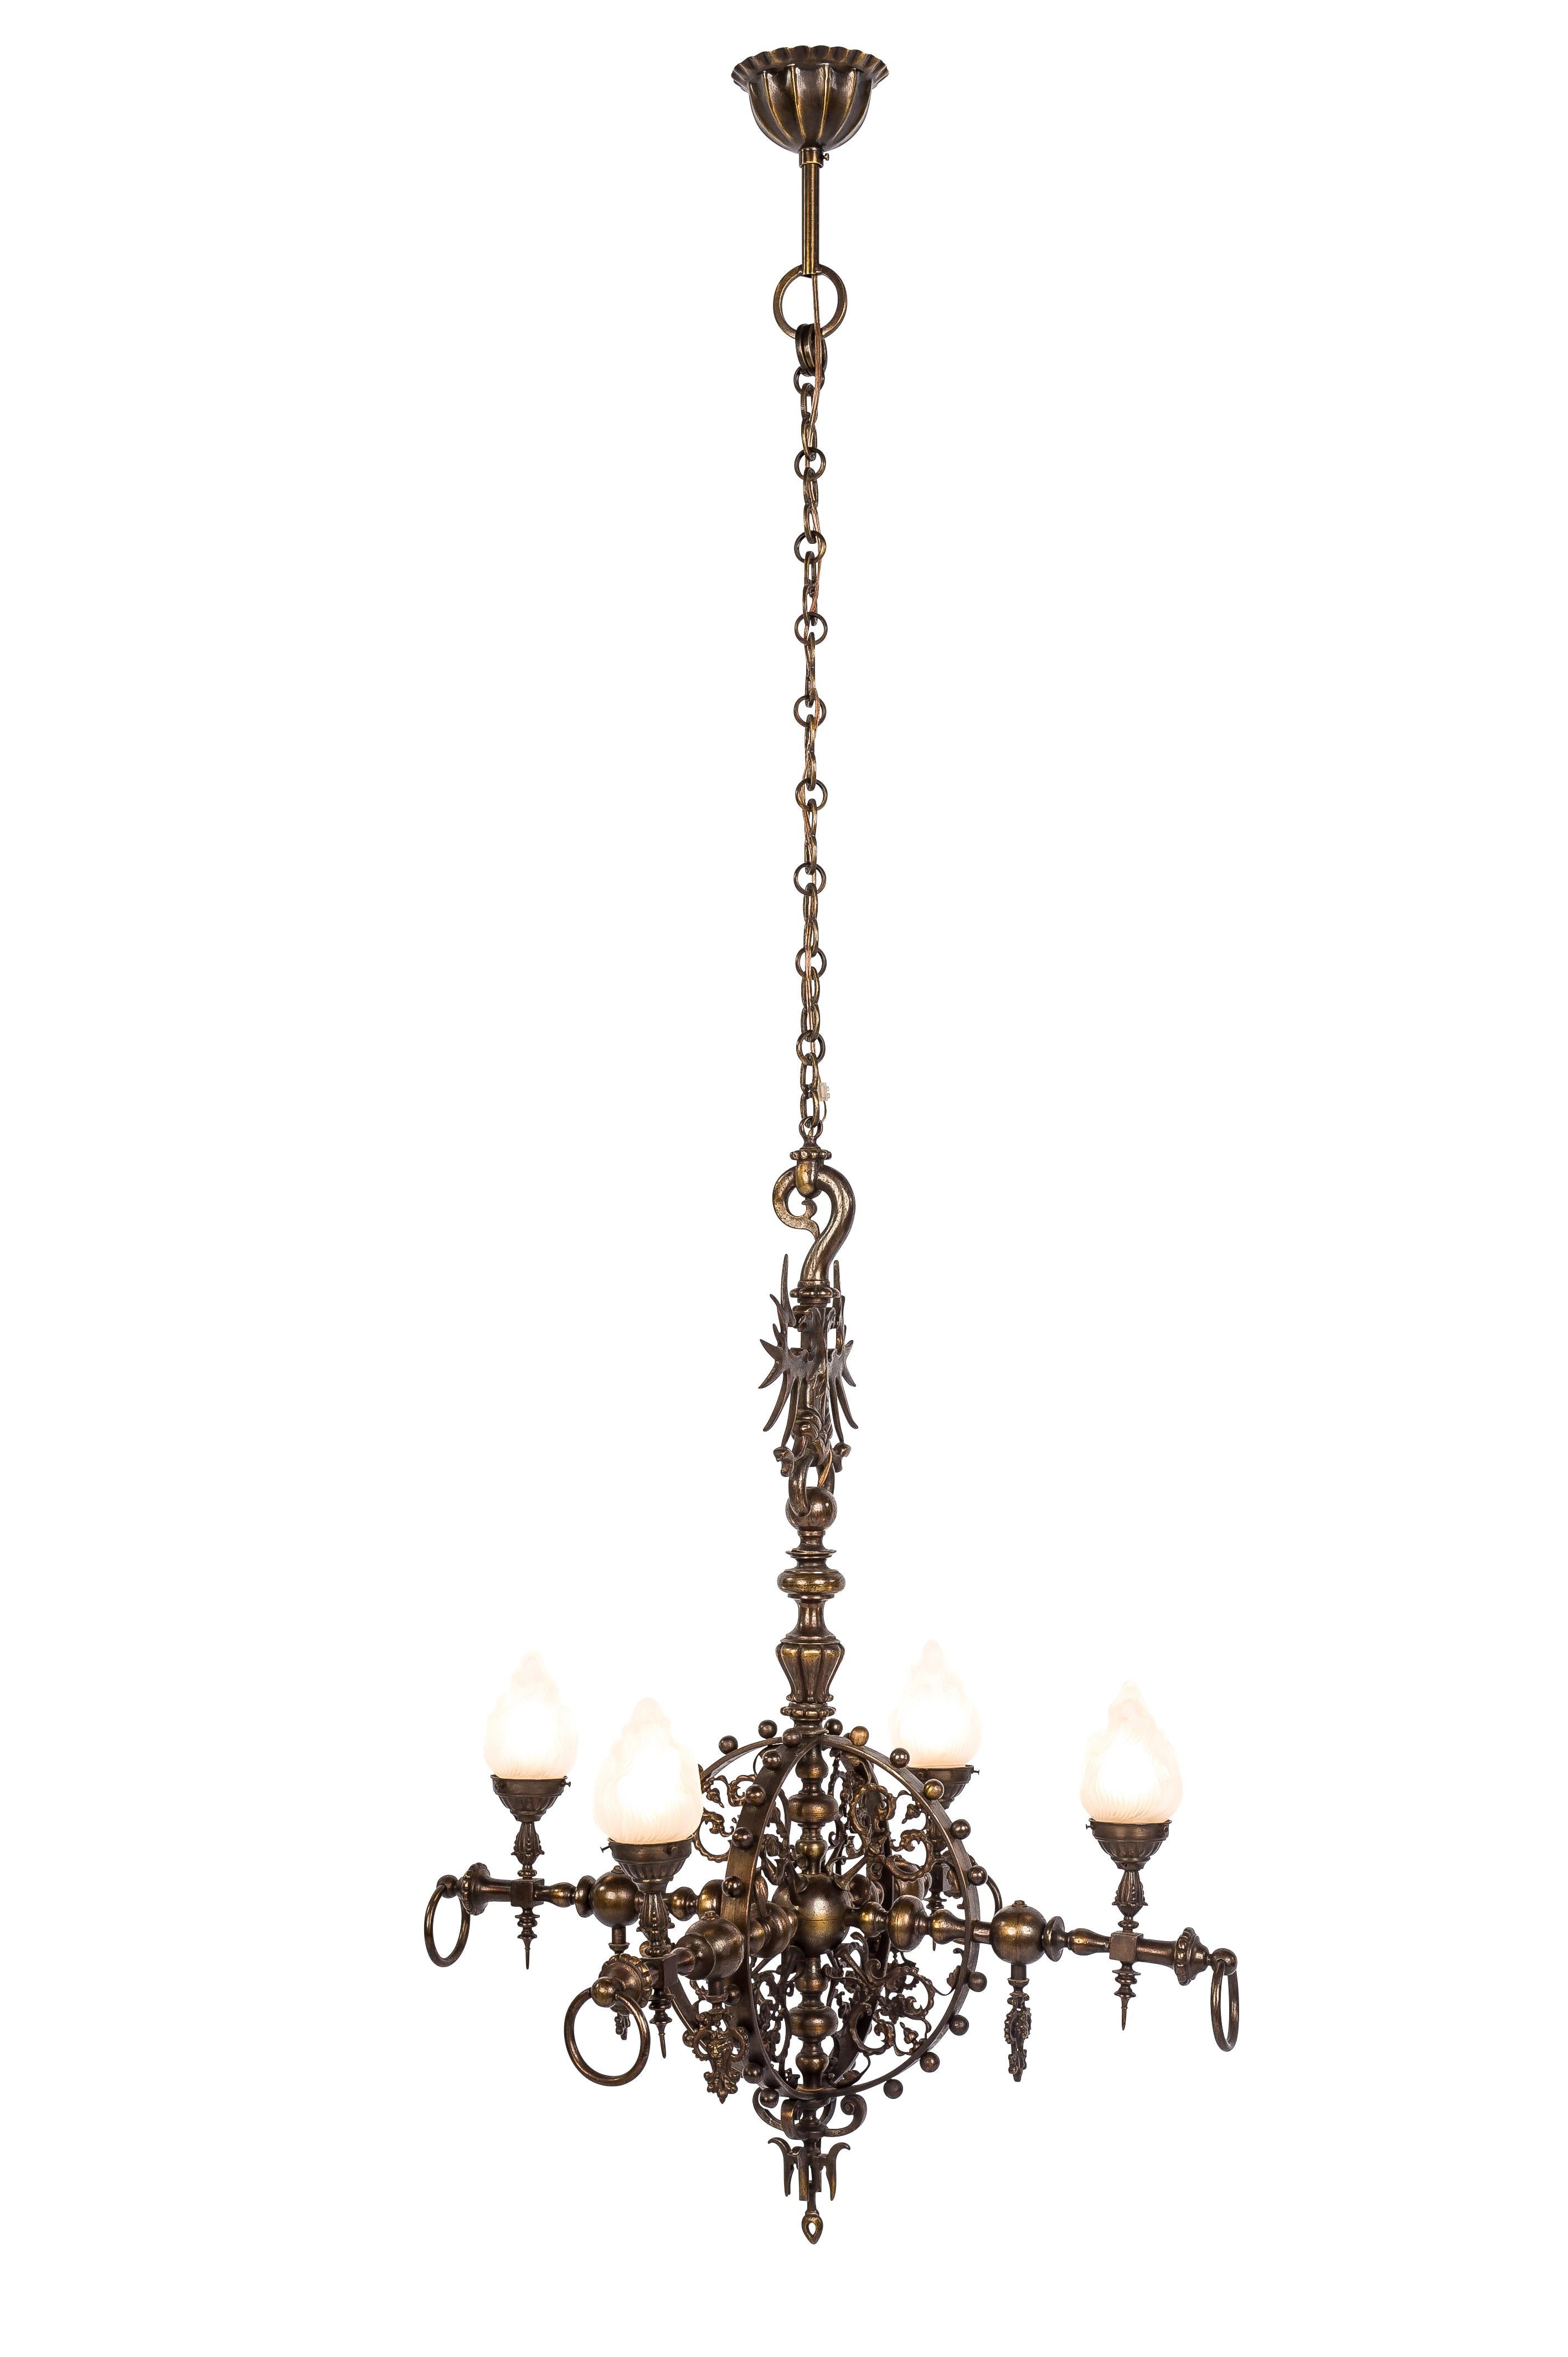 20th Century Antique Early 20th-Century Patinated Brass French Chandelier with Torches